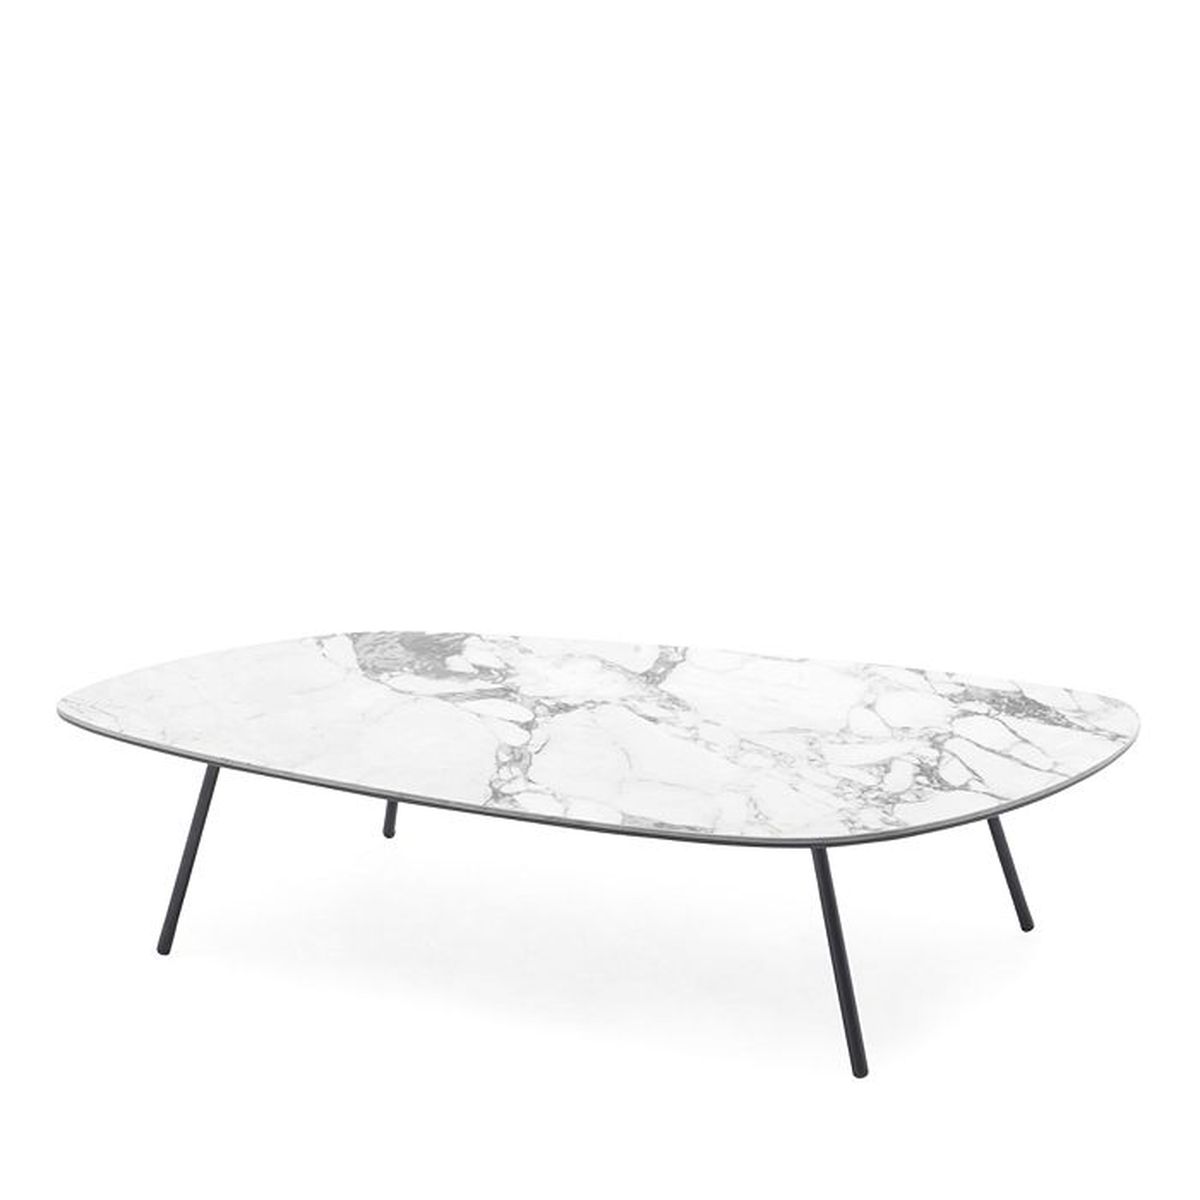 A rounded marble table with four black-colored legs. 